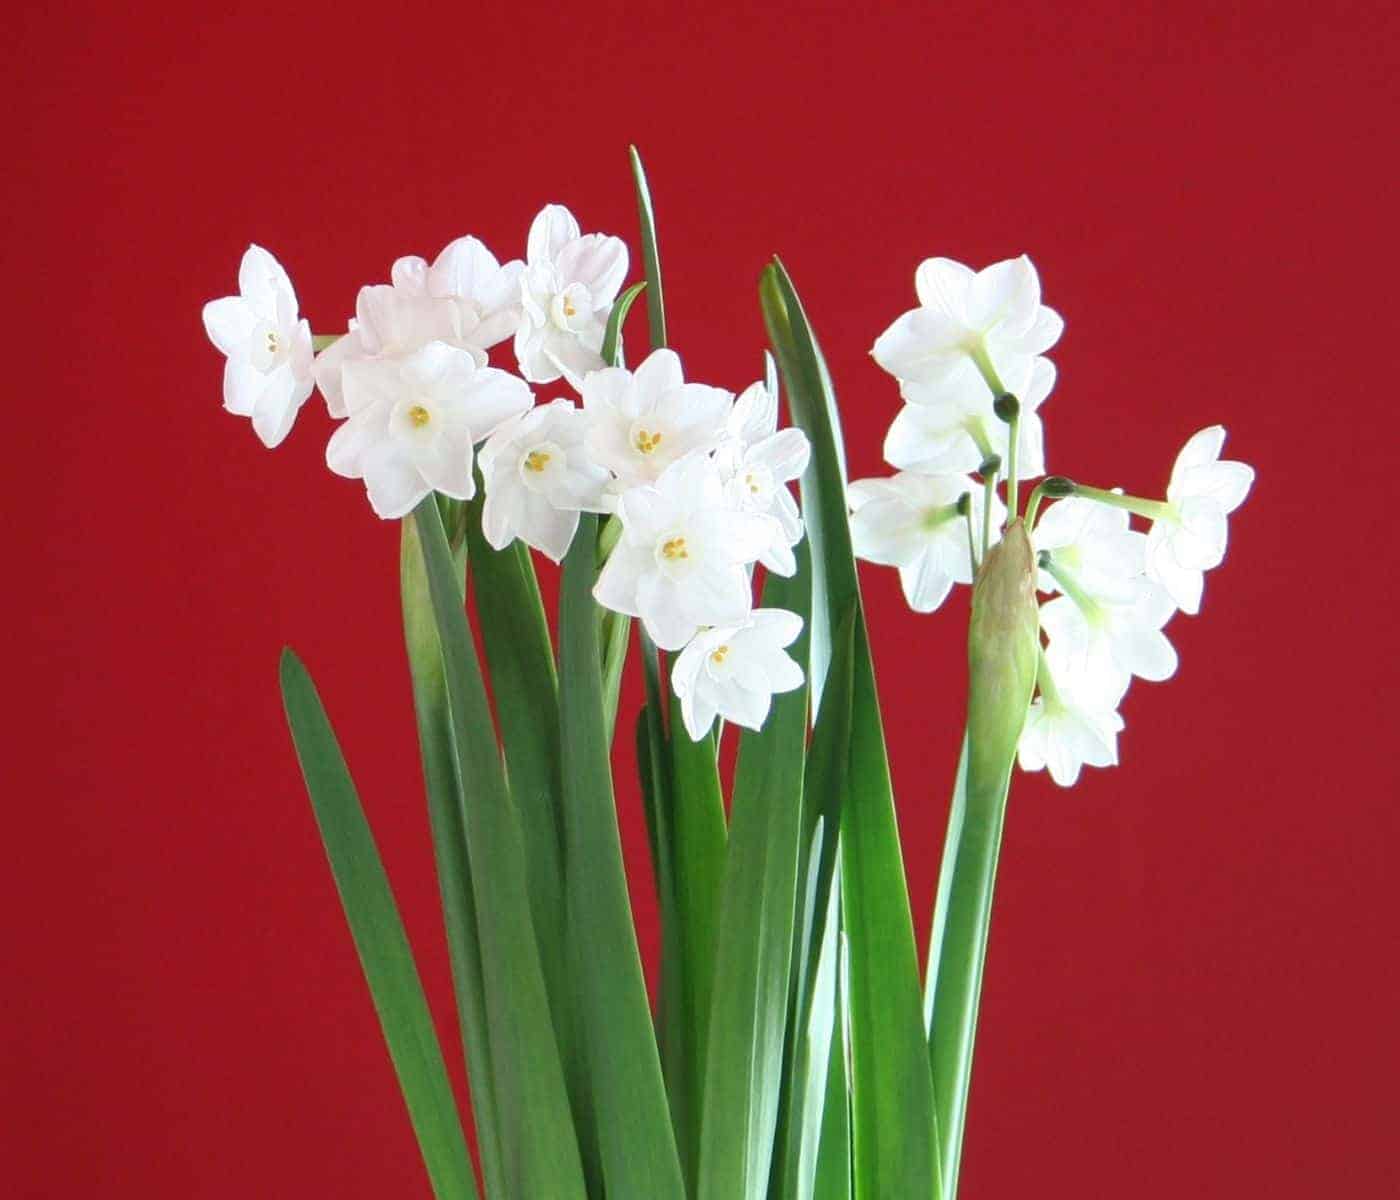 Paperwhites in bloom over the holidays